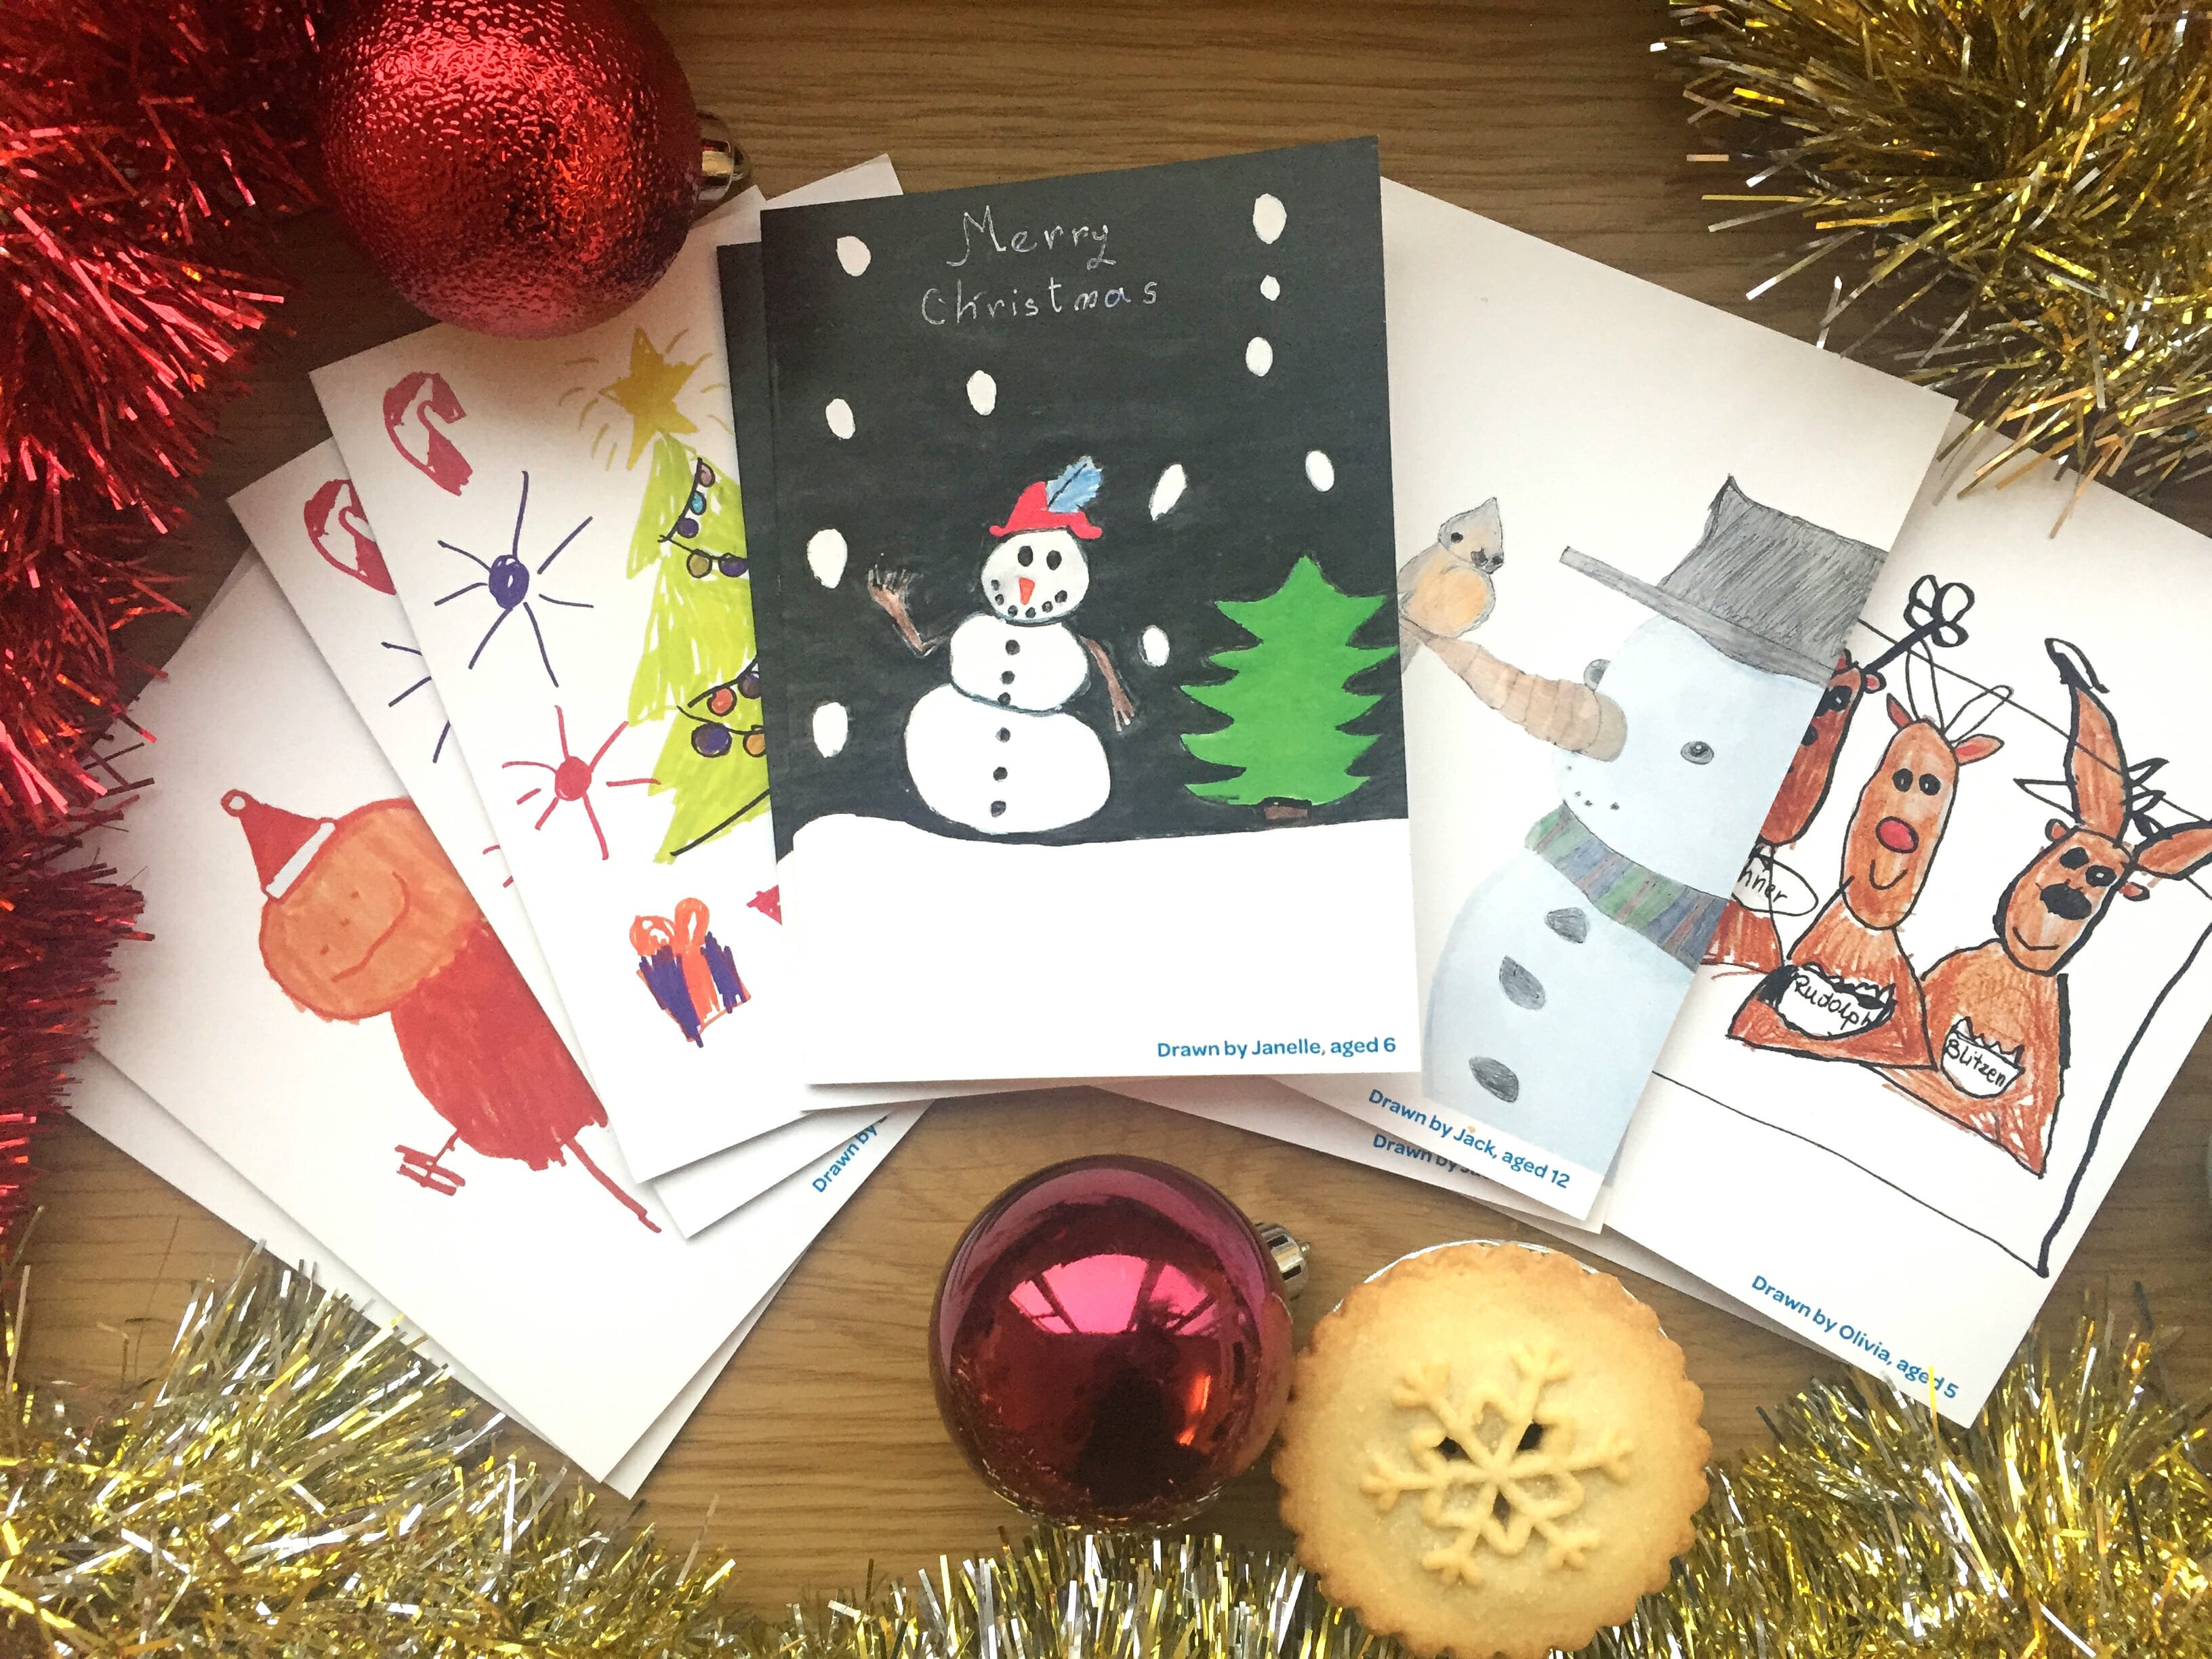 Christmas Card Competition Childhood Eye Cancer Trust